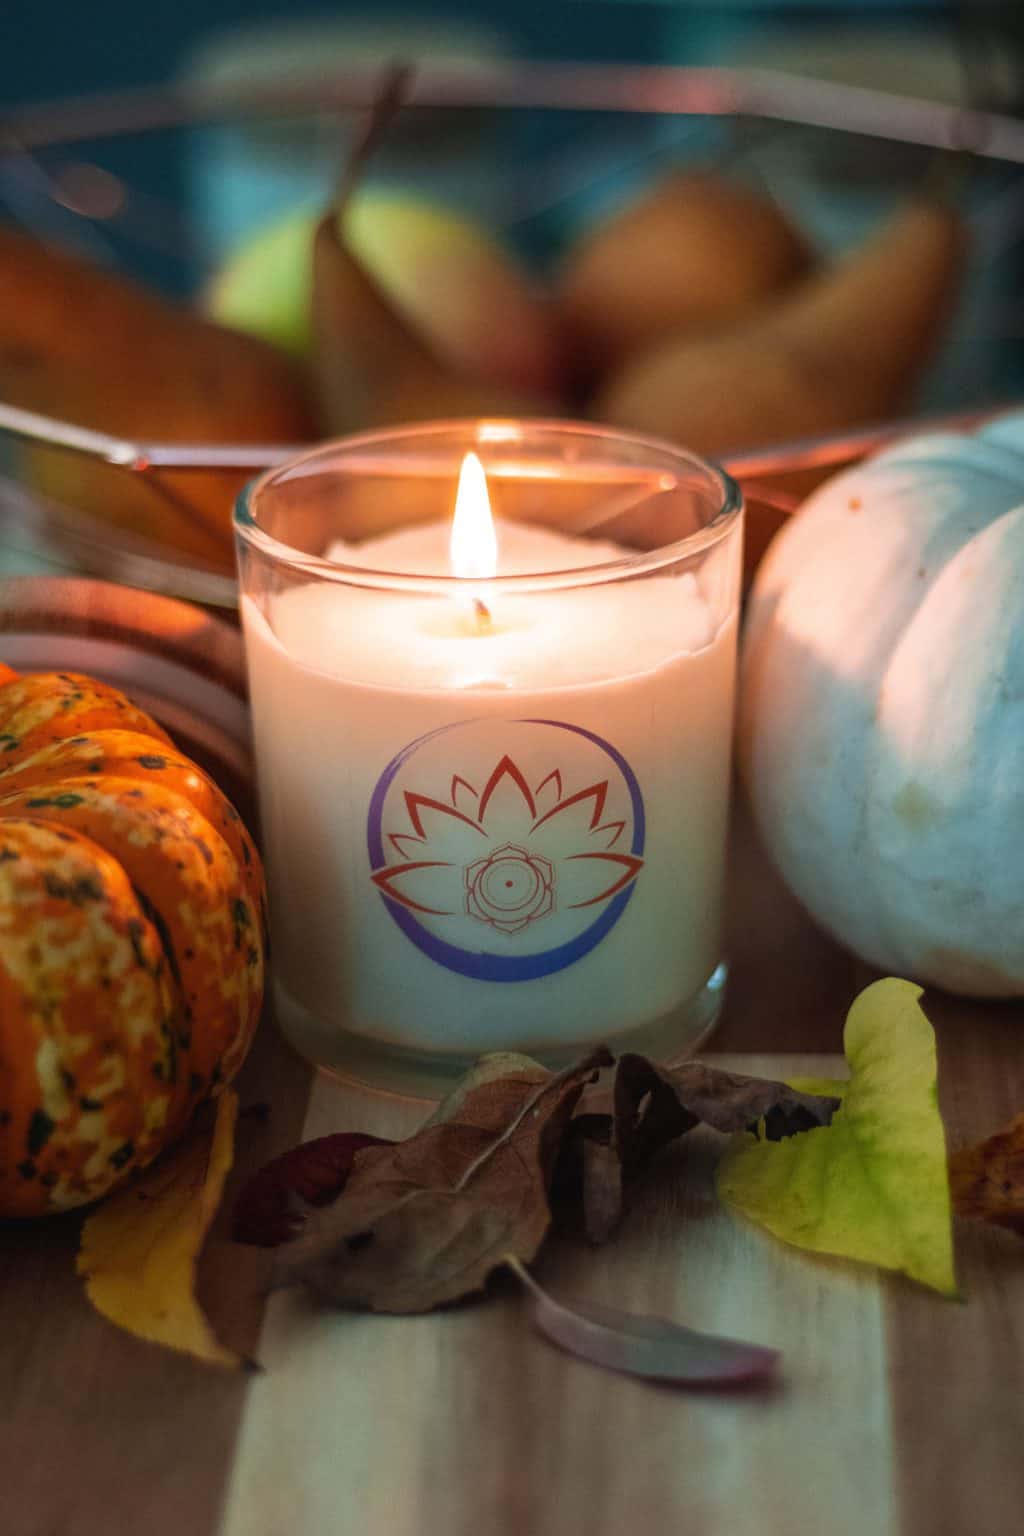 A white lighted scented candle displayed among pumpkins and pears